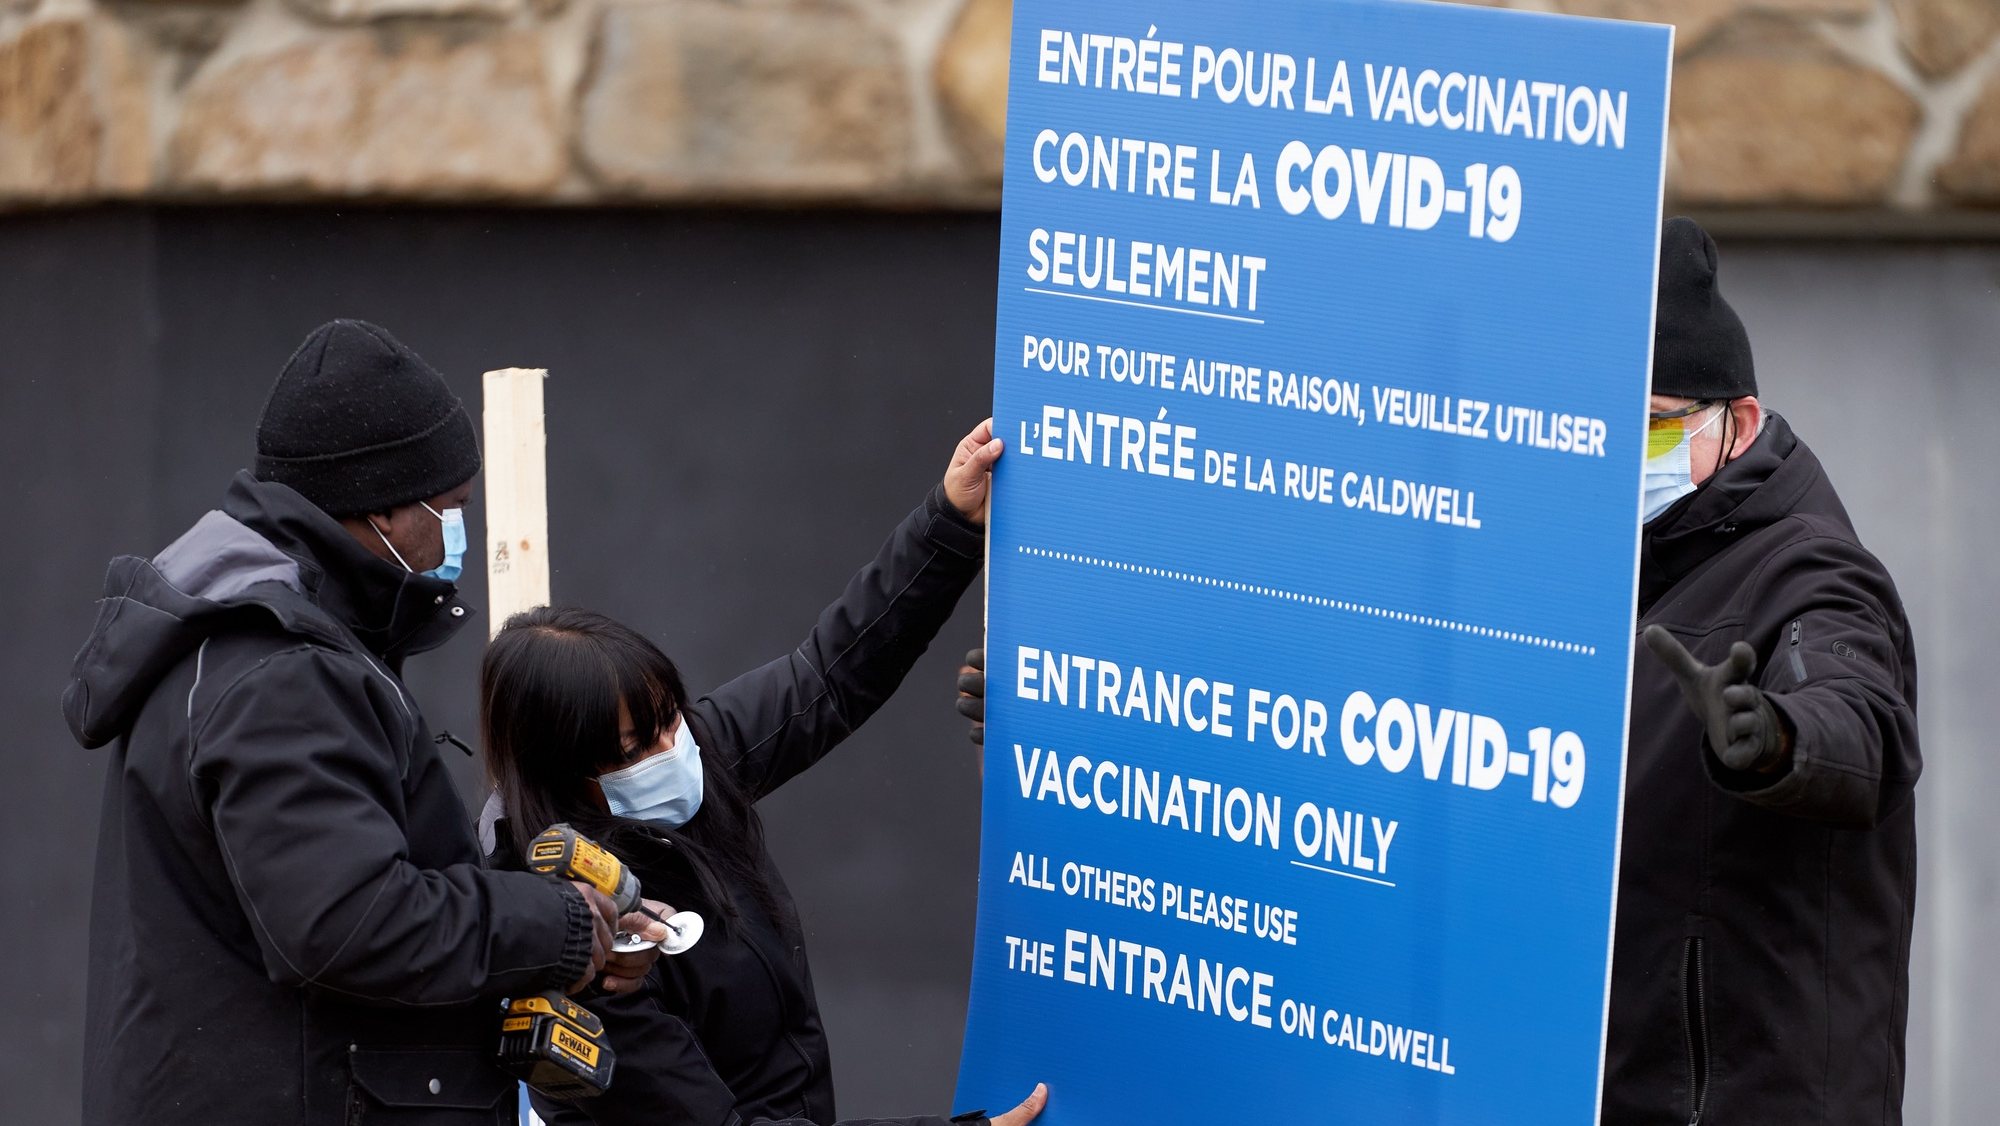 epa08883861 Workers set up signs at the first center to recive Covid-19 vaccine in Montreal, Canada, 14 December 2020. The first patients in Canada will be vaccinated there with the Pfizer BionNtech vaccine.  EPA/ANDRE PICHETTE